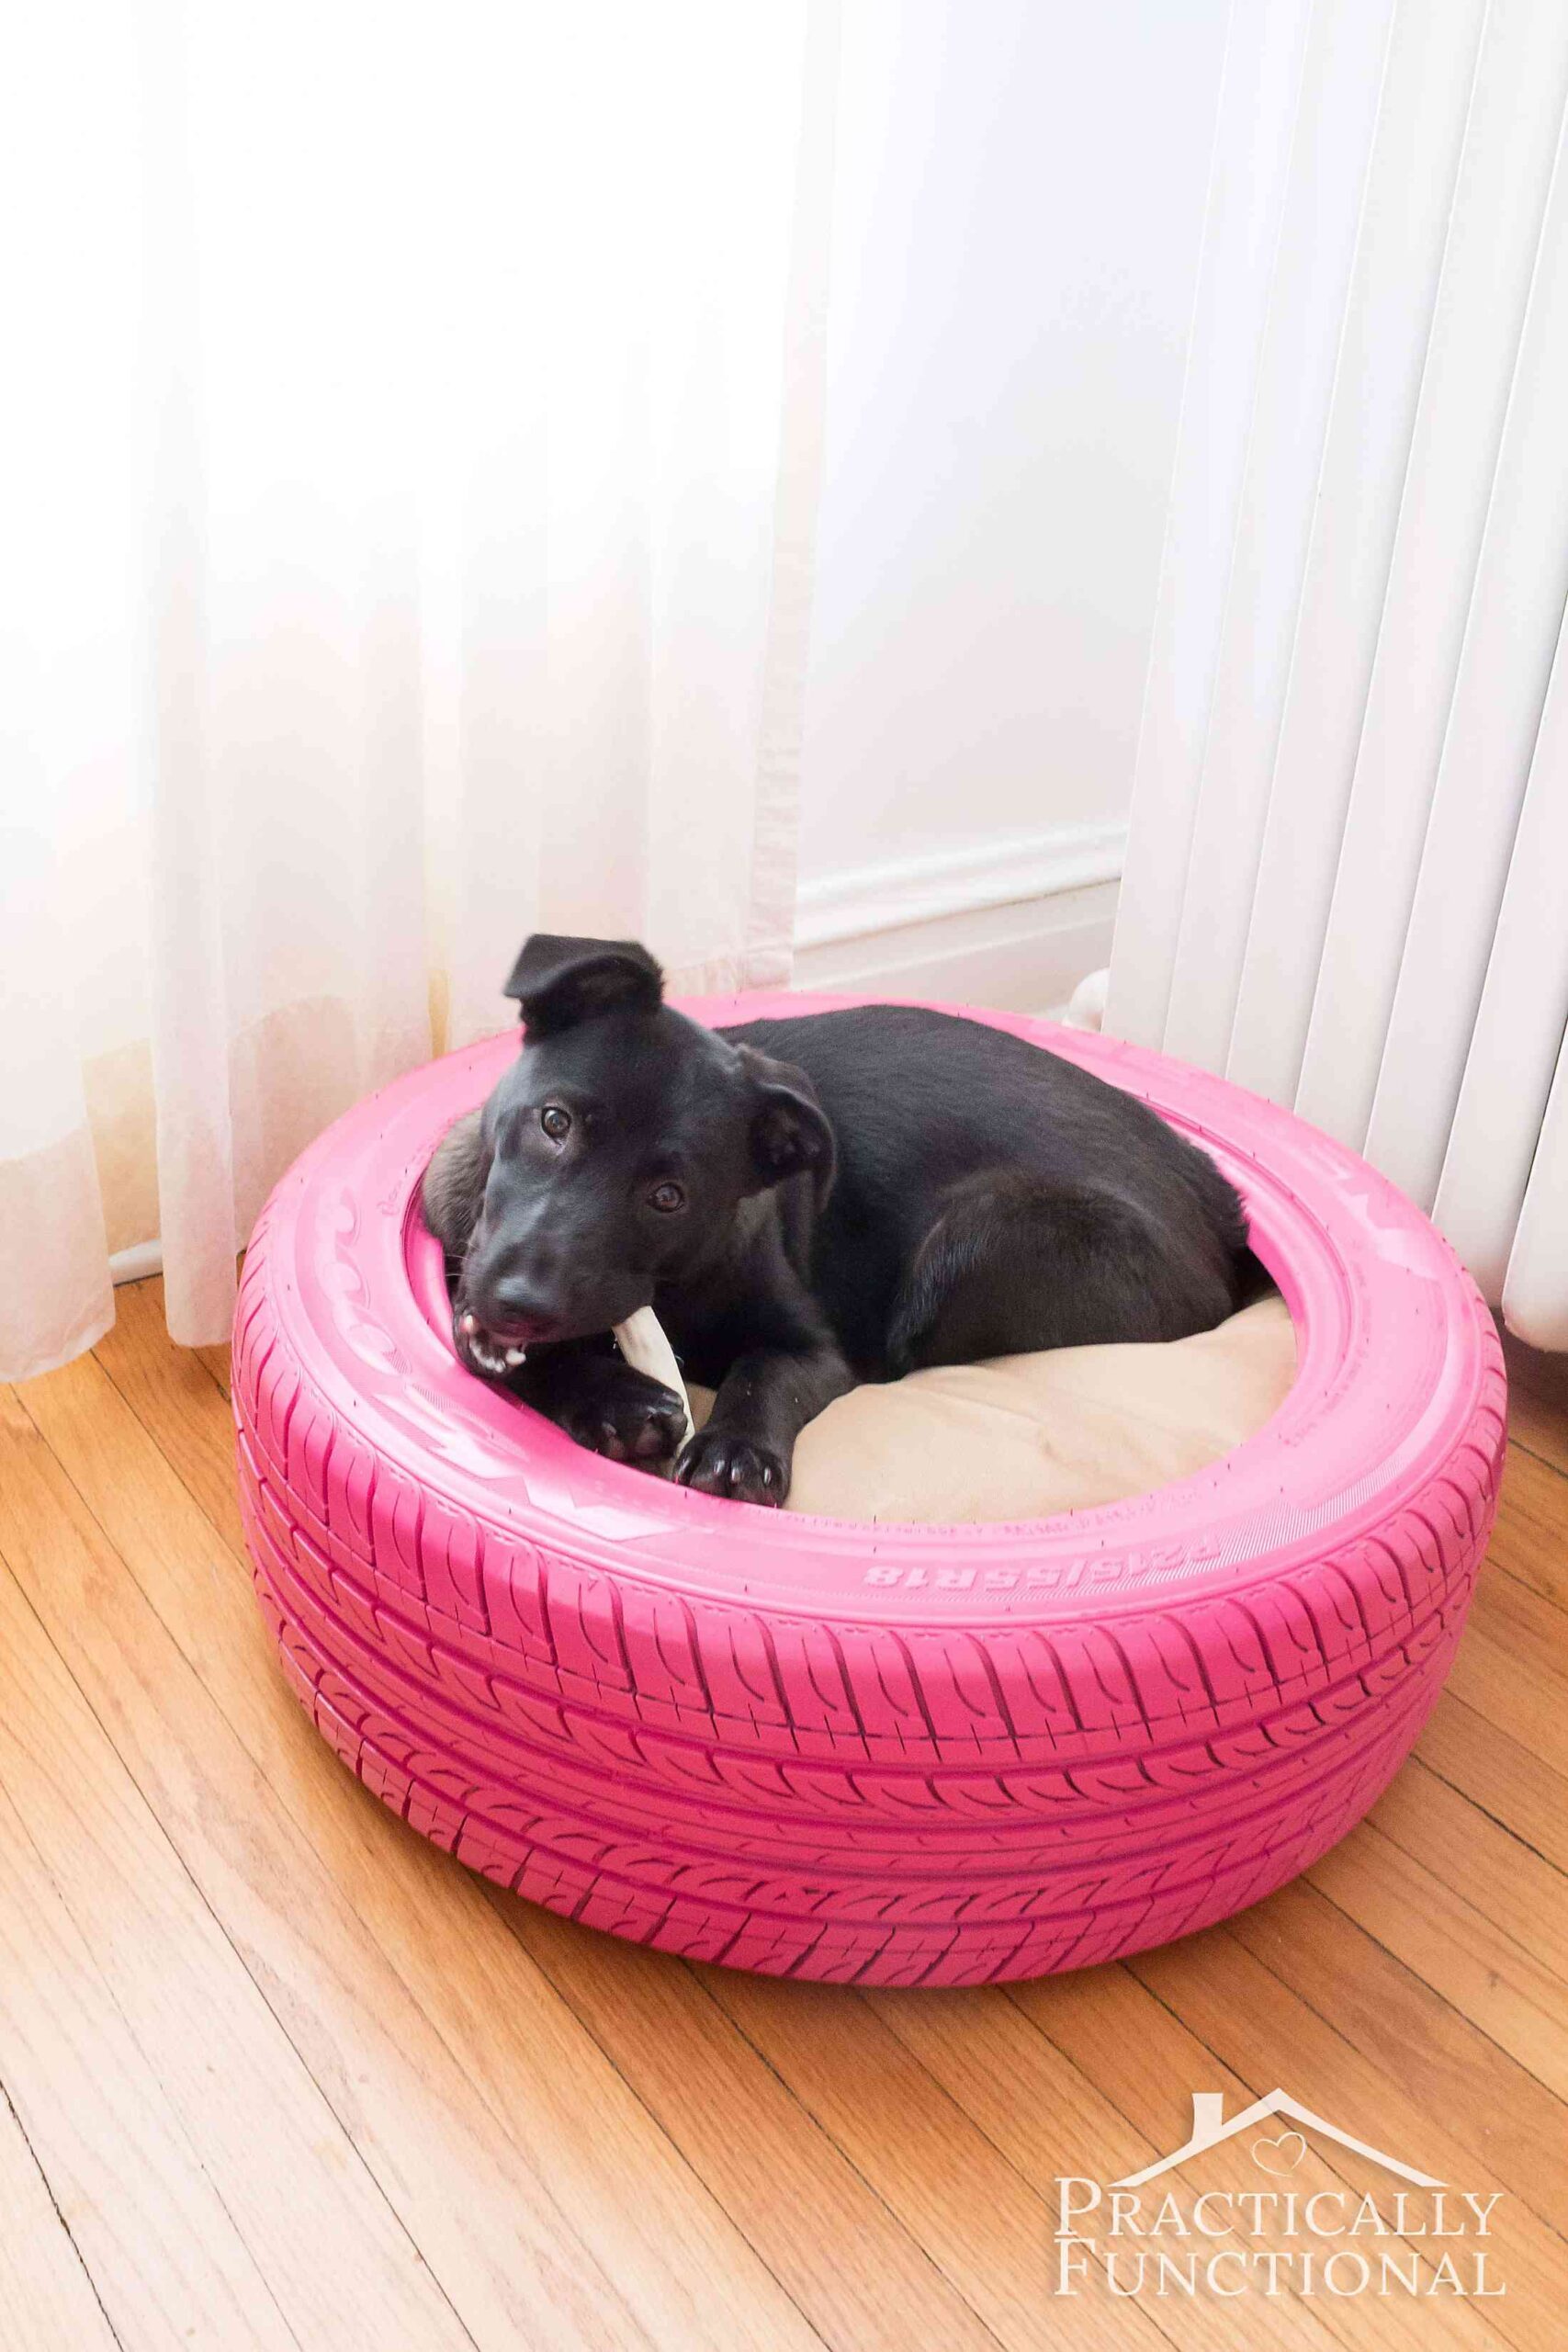 A black labrador puppy curled up inside a pink tire repurposed as a pet bed.